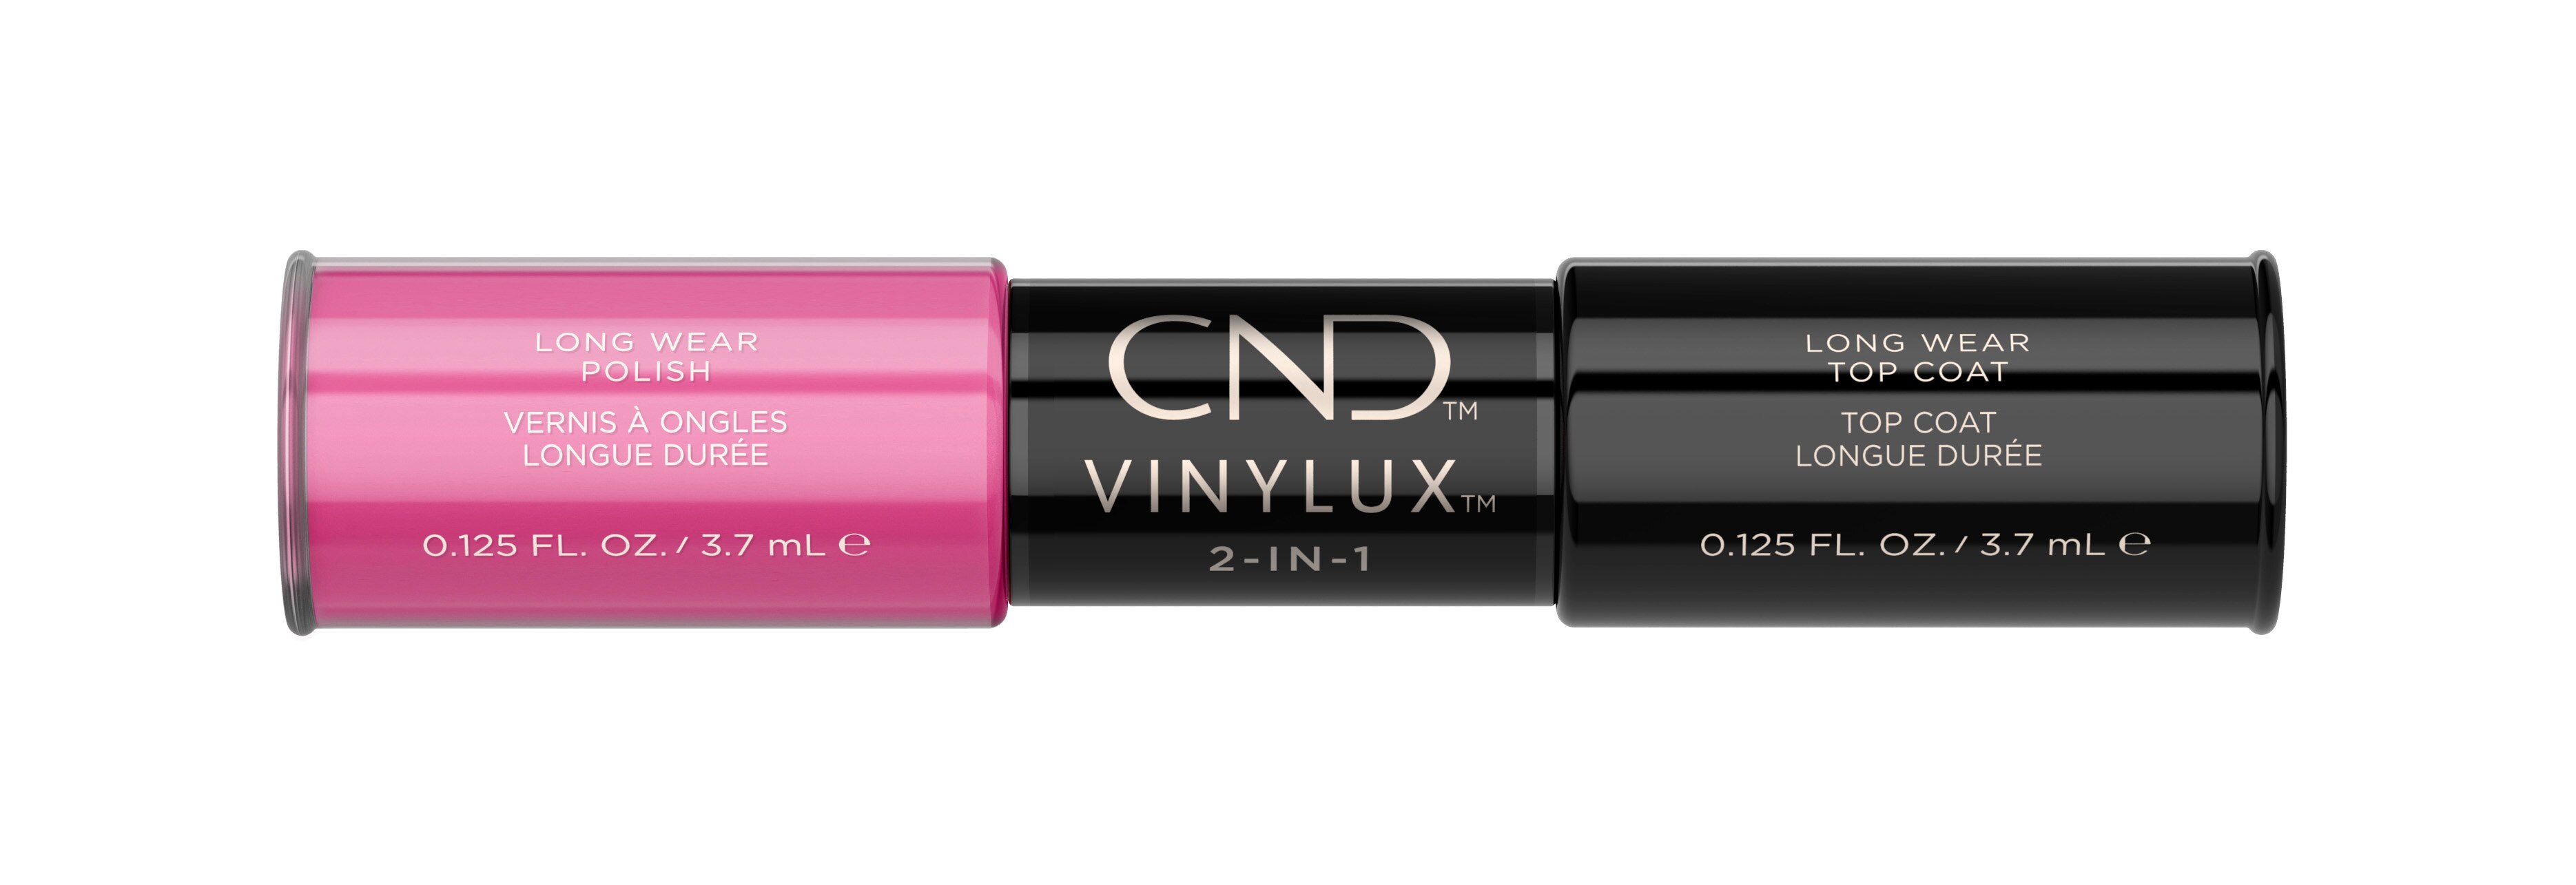 8. CND Vinylux Long Wear Nail Polish, Stuck On You - wide 1